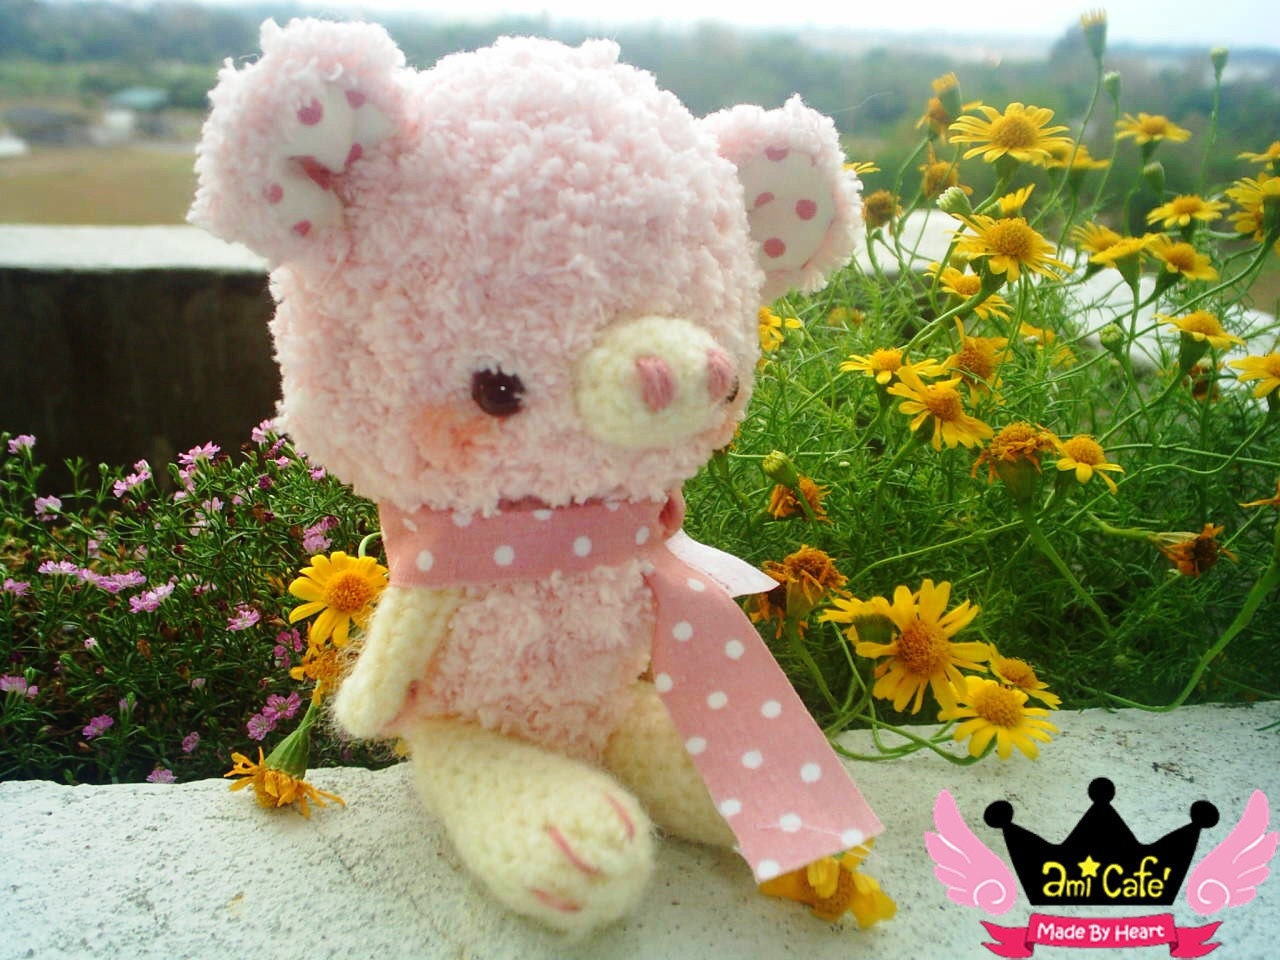 Piggy - Cotton Candy Amigurumi Pinky Piggy by Ami Cafe' - READY TO SHIP